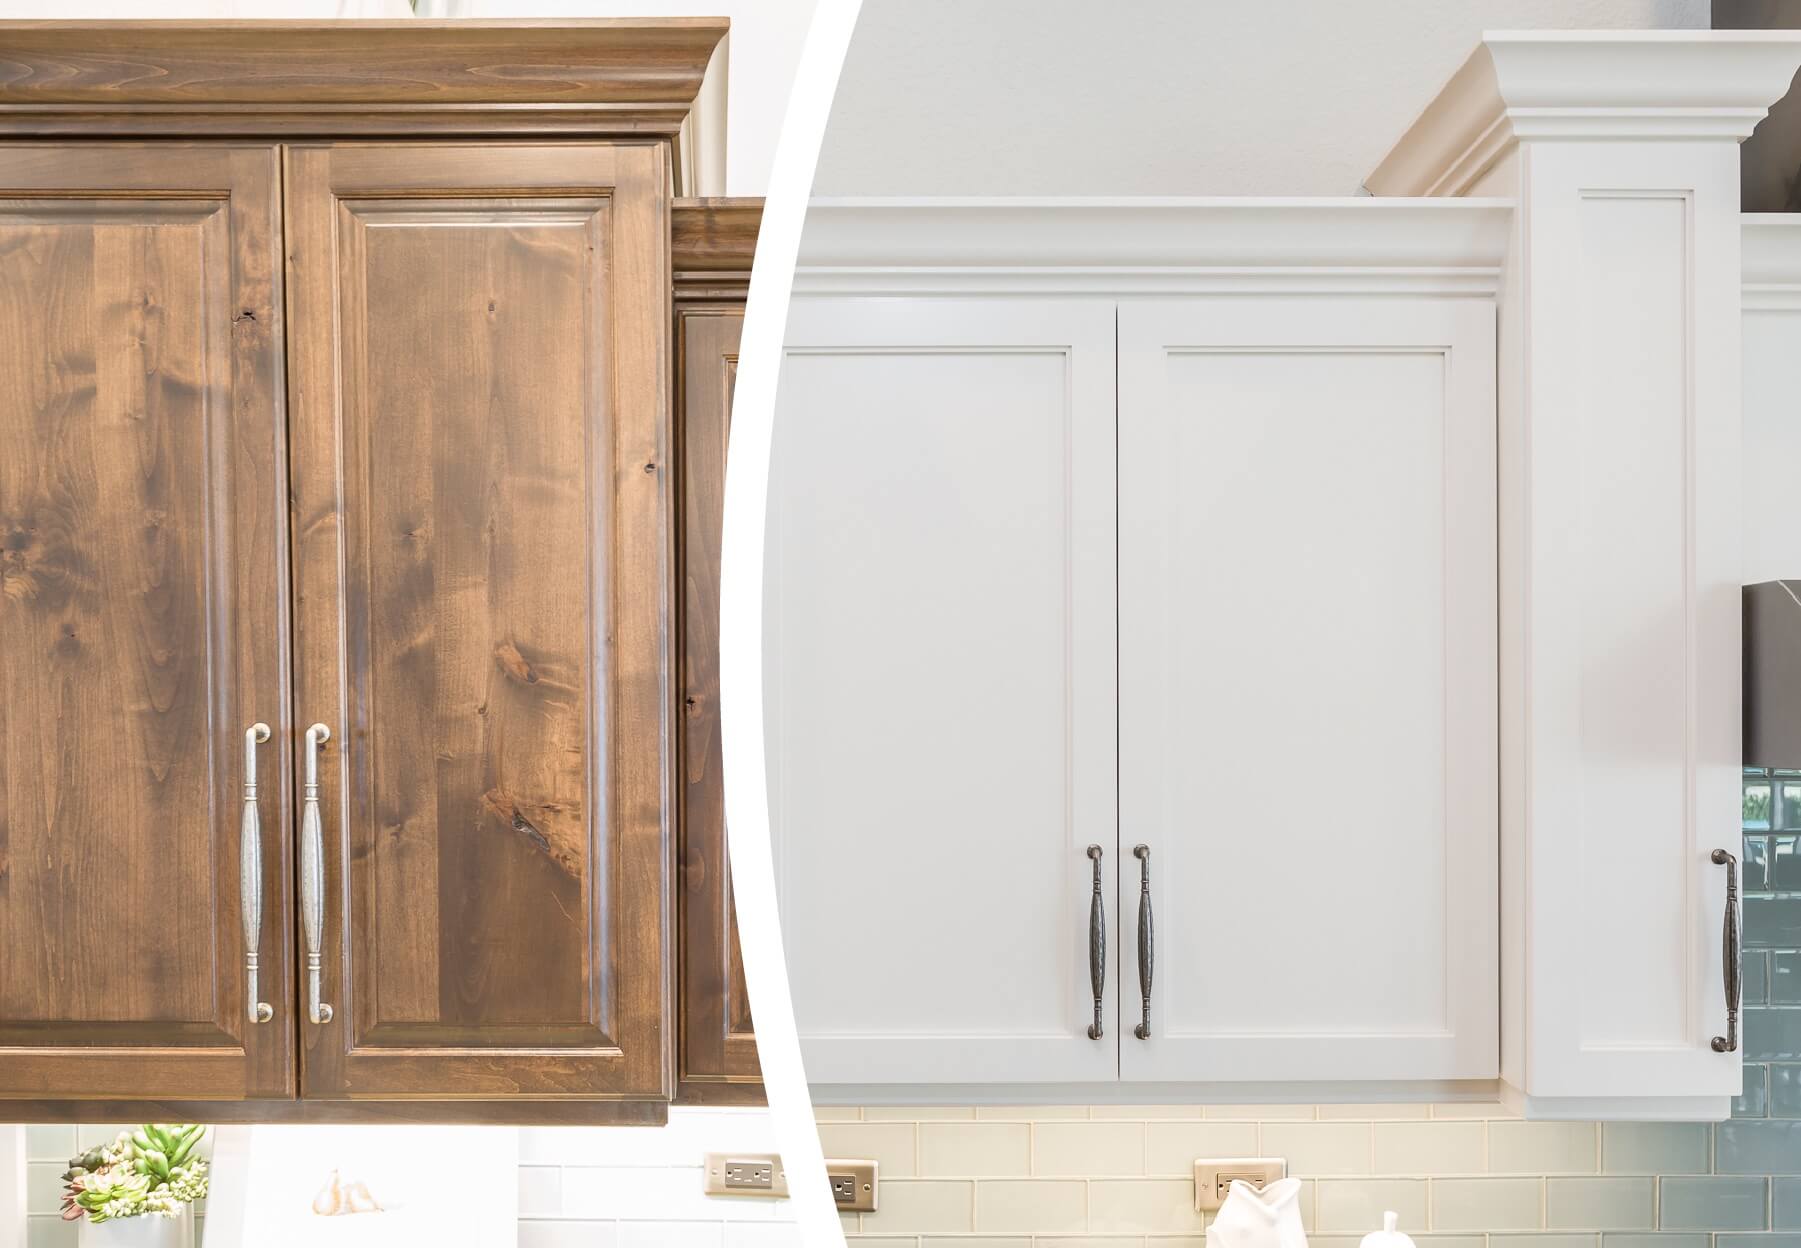 Cabinet Door Replacement N Hance Ontario, Can You Replace Just The Cabinet Doors